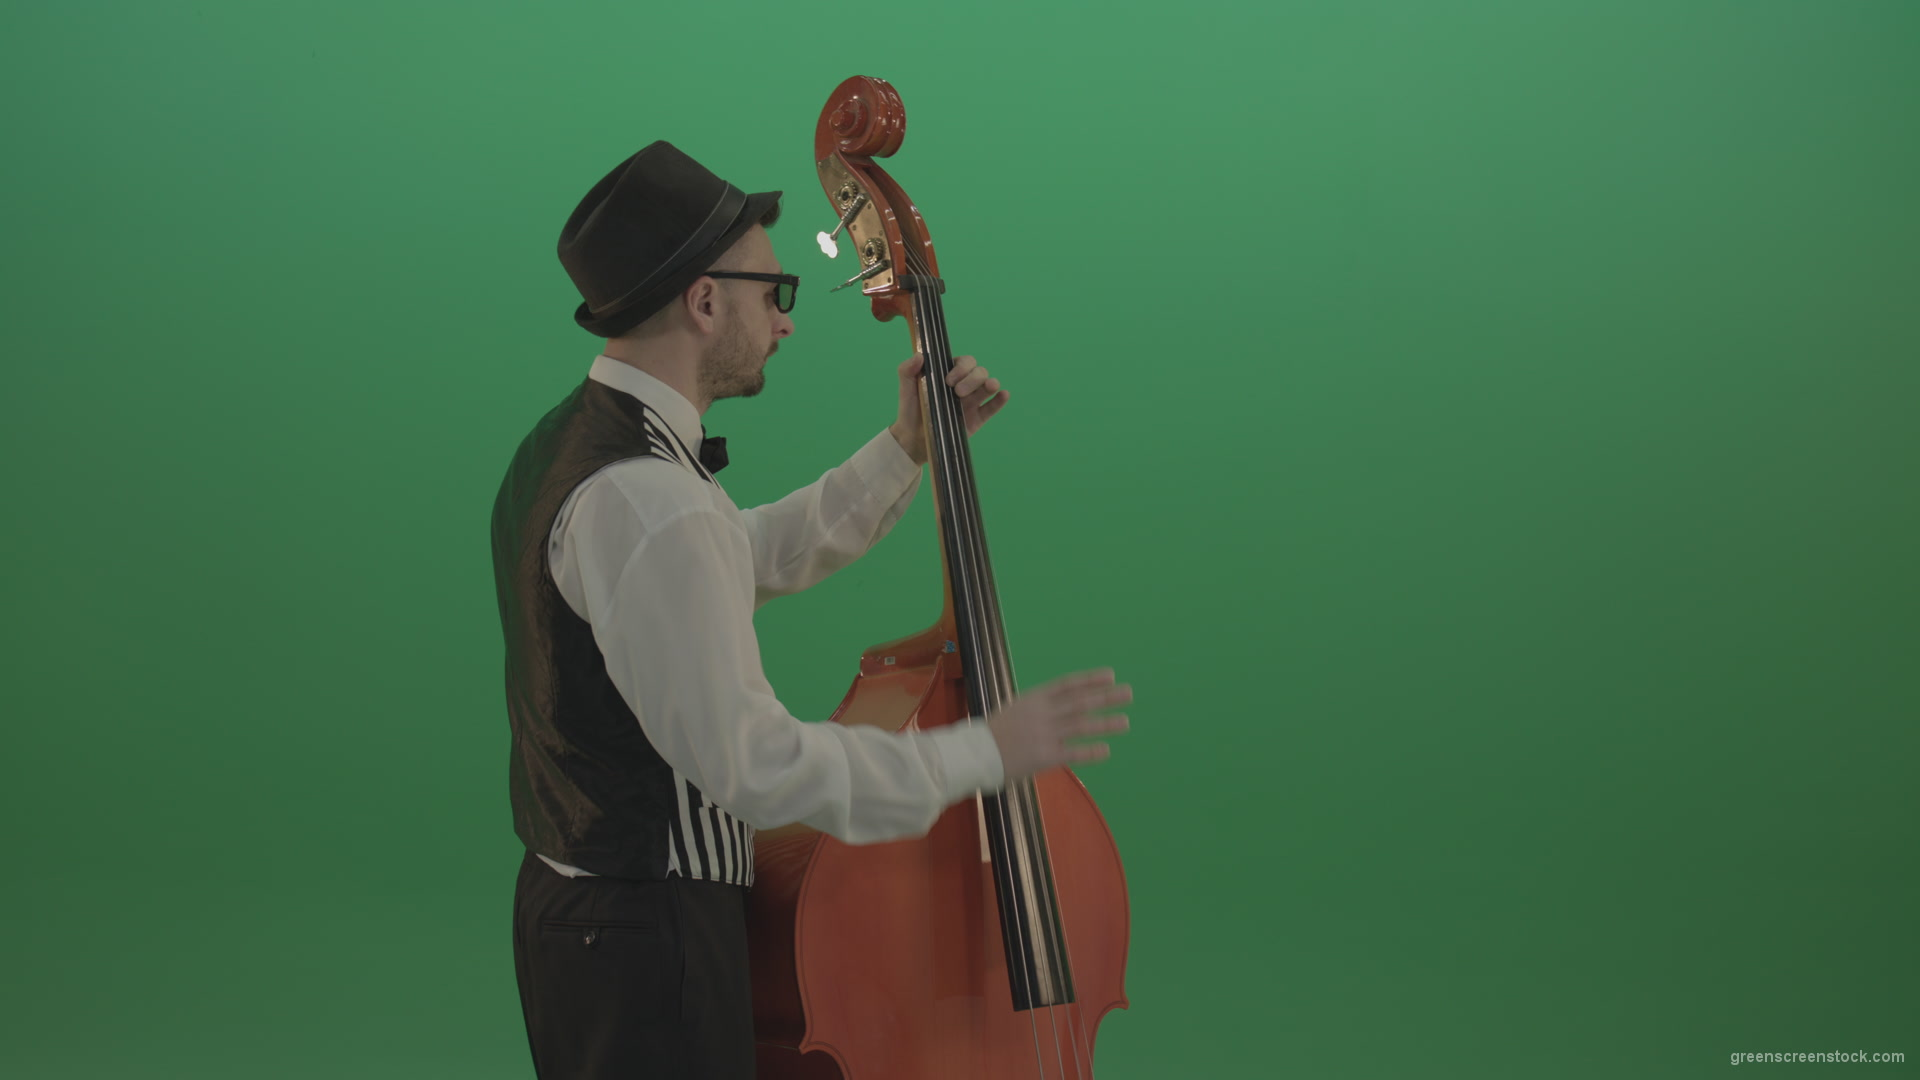 Young-Man-play-jazz-on-double-bass-String-music-instrument-isolated-on-green-screen-in-back-side-view_009 Green Screen Stock